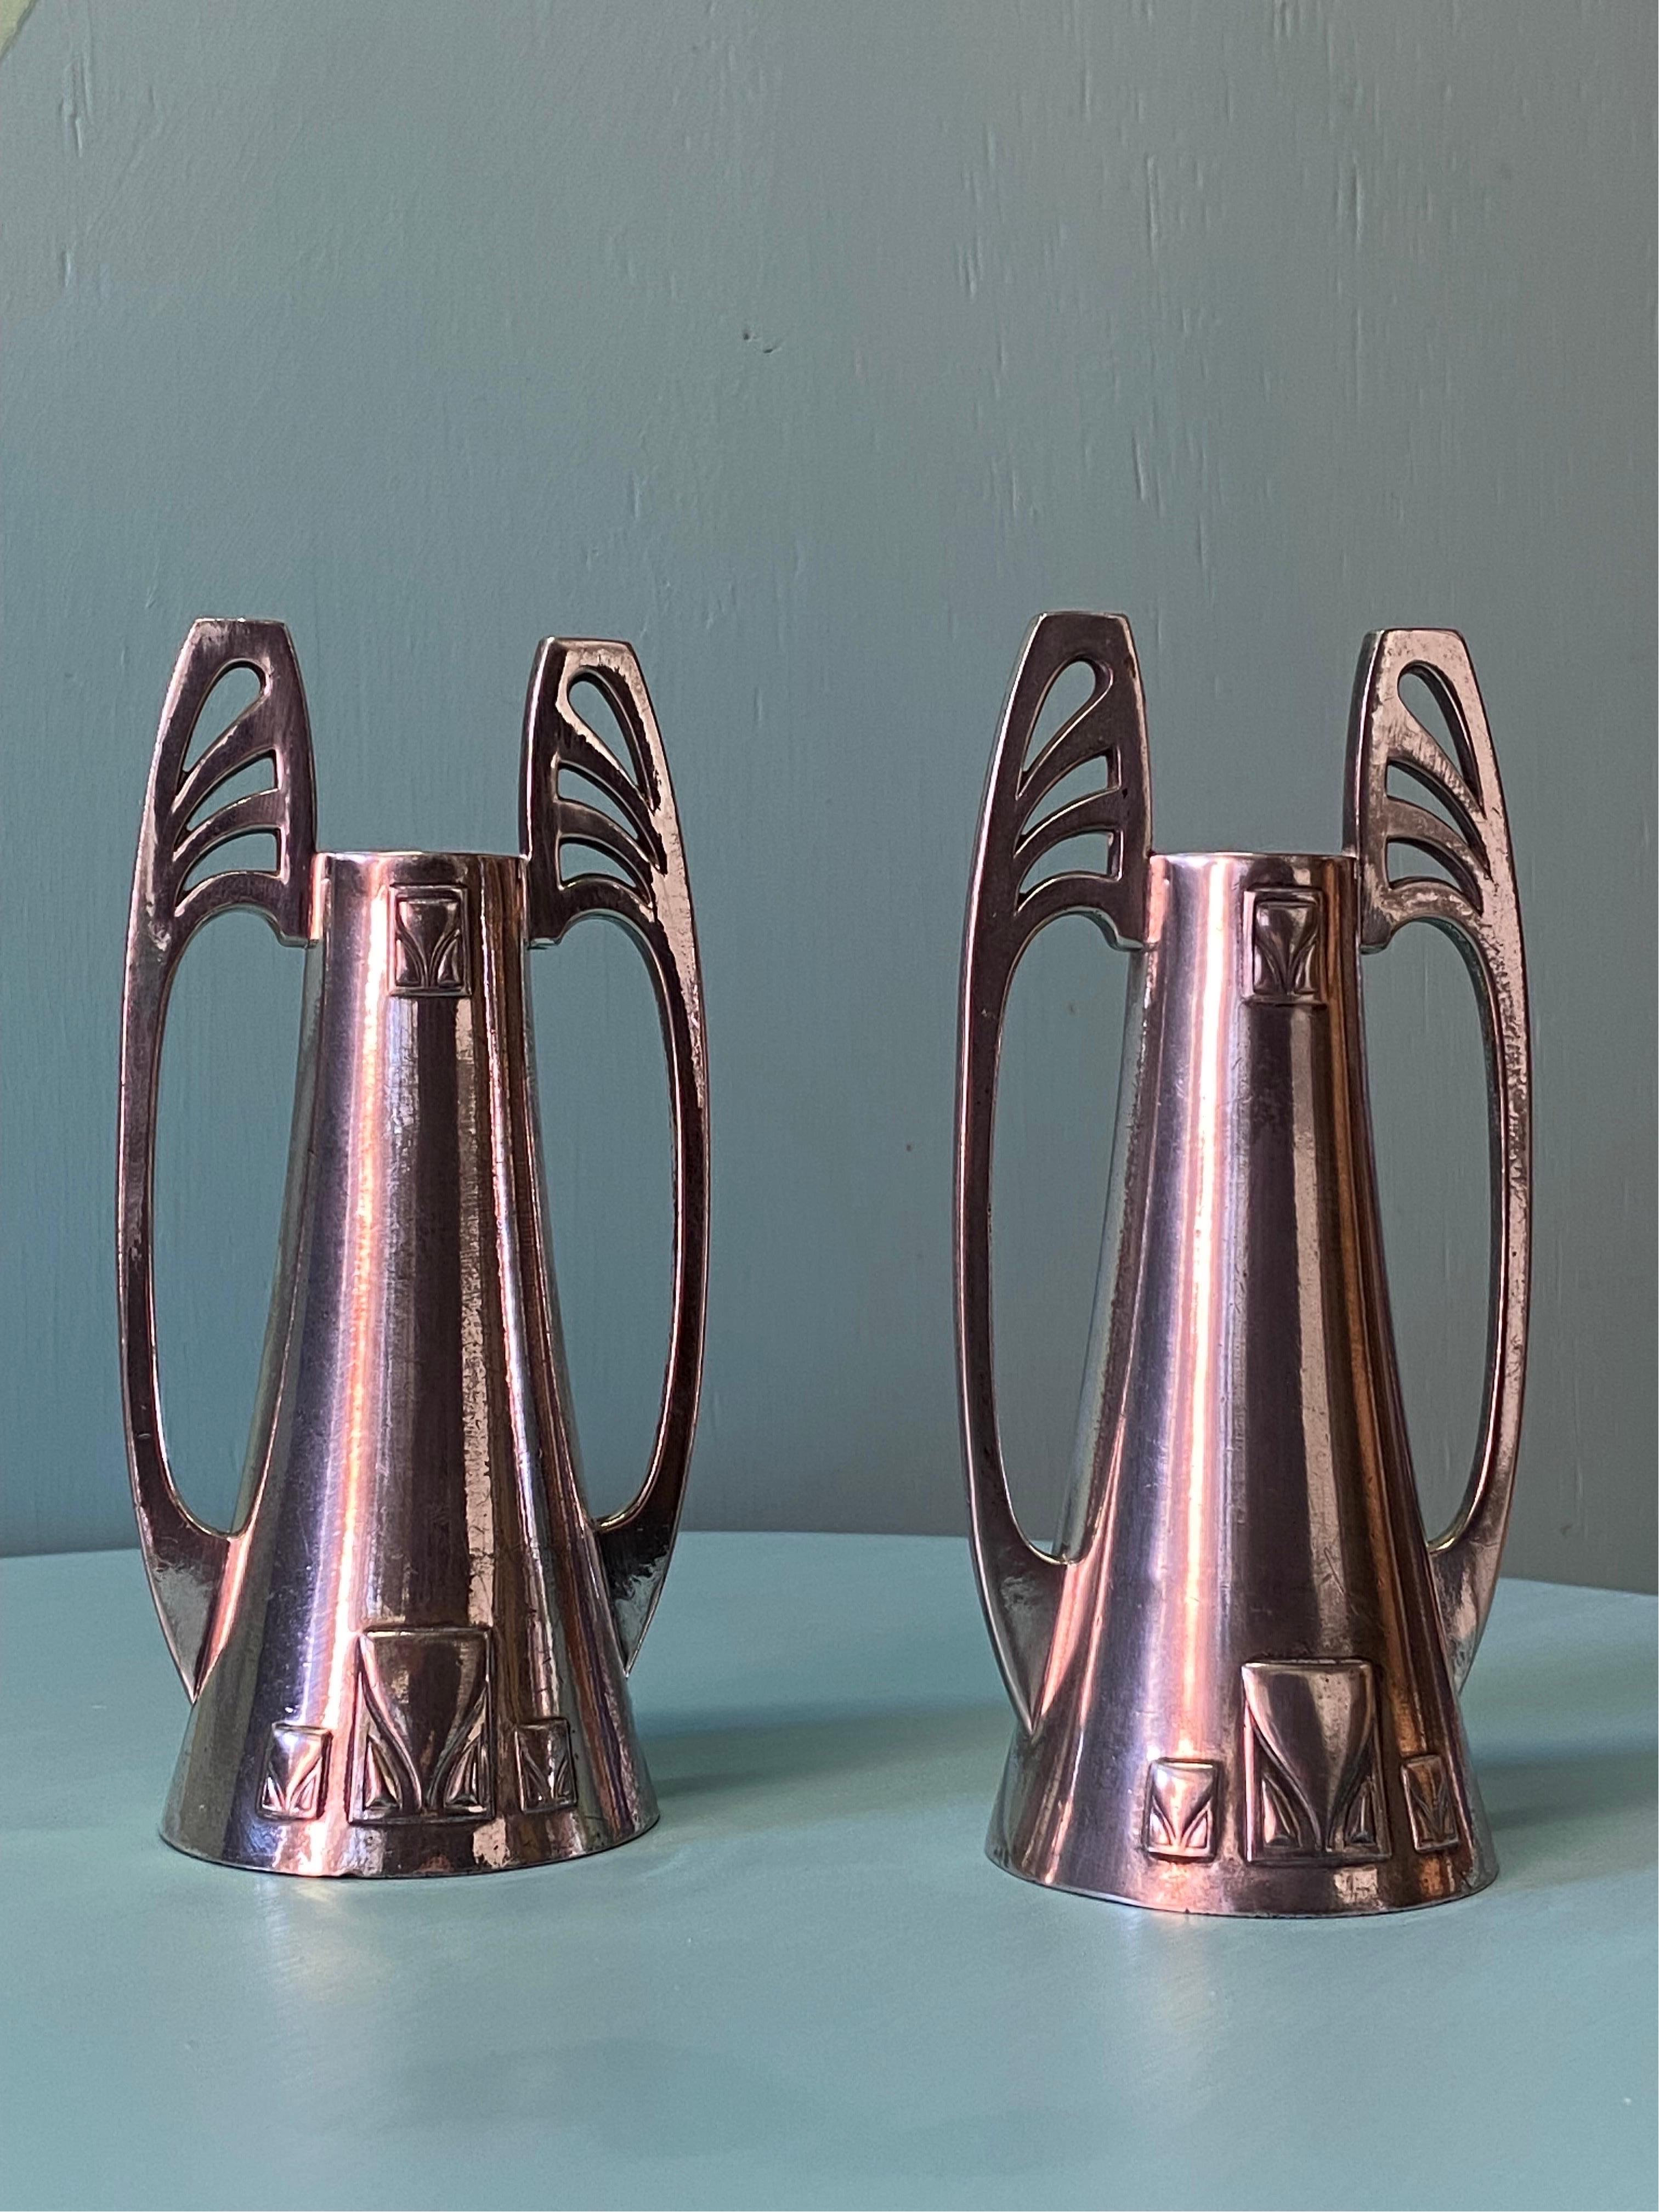 A pair of Art Nouveau or Secessionist WMF 'Britannia metal' (pewter) and silver plate candle holders. Both marked to the interior of the base 'WMFB' and 'OX'. This finish was used between 1900 and 1912 and was a thick silver plate with an oxidized